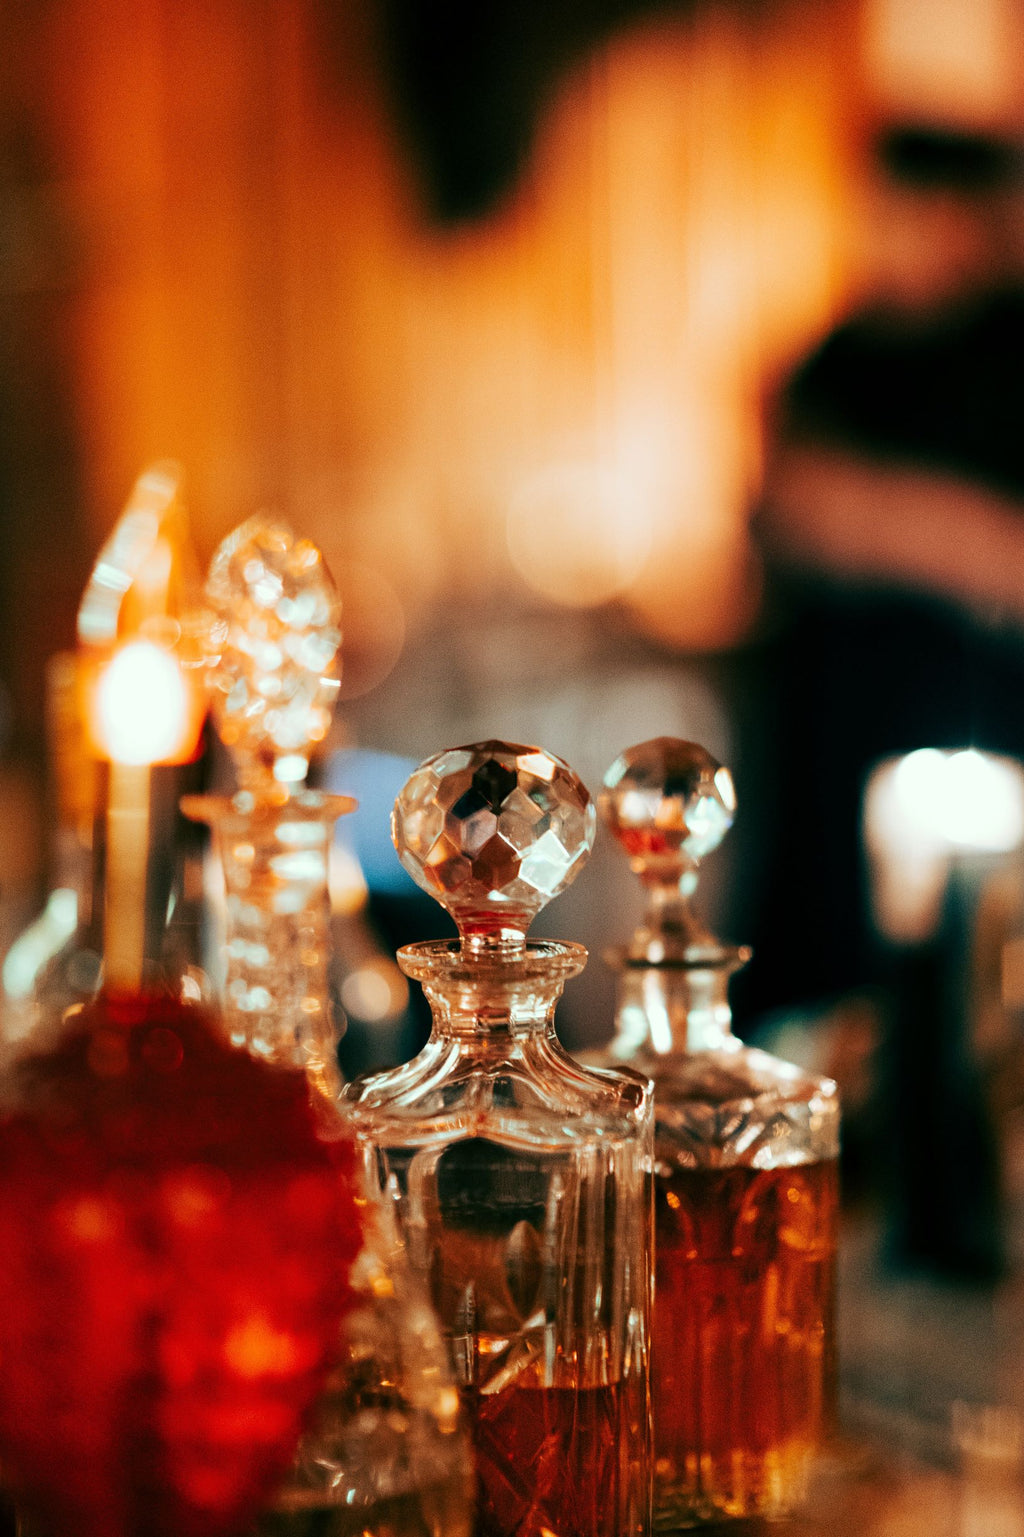 5 Reasons to Switch to Alcohol-free Fragrance